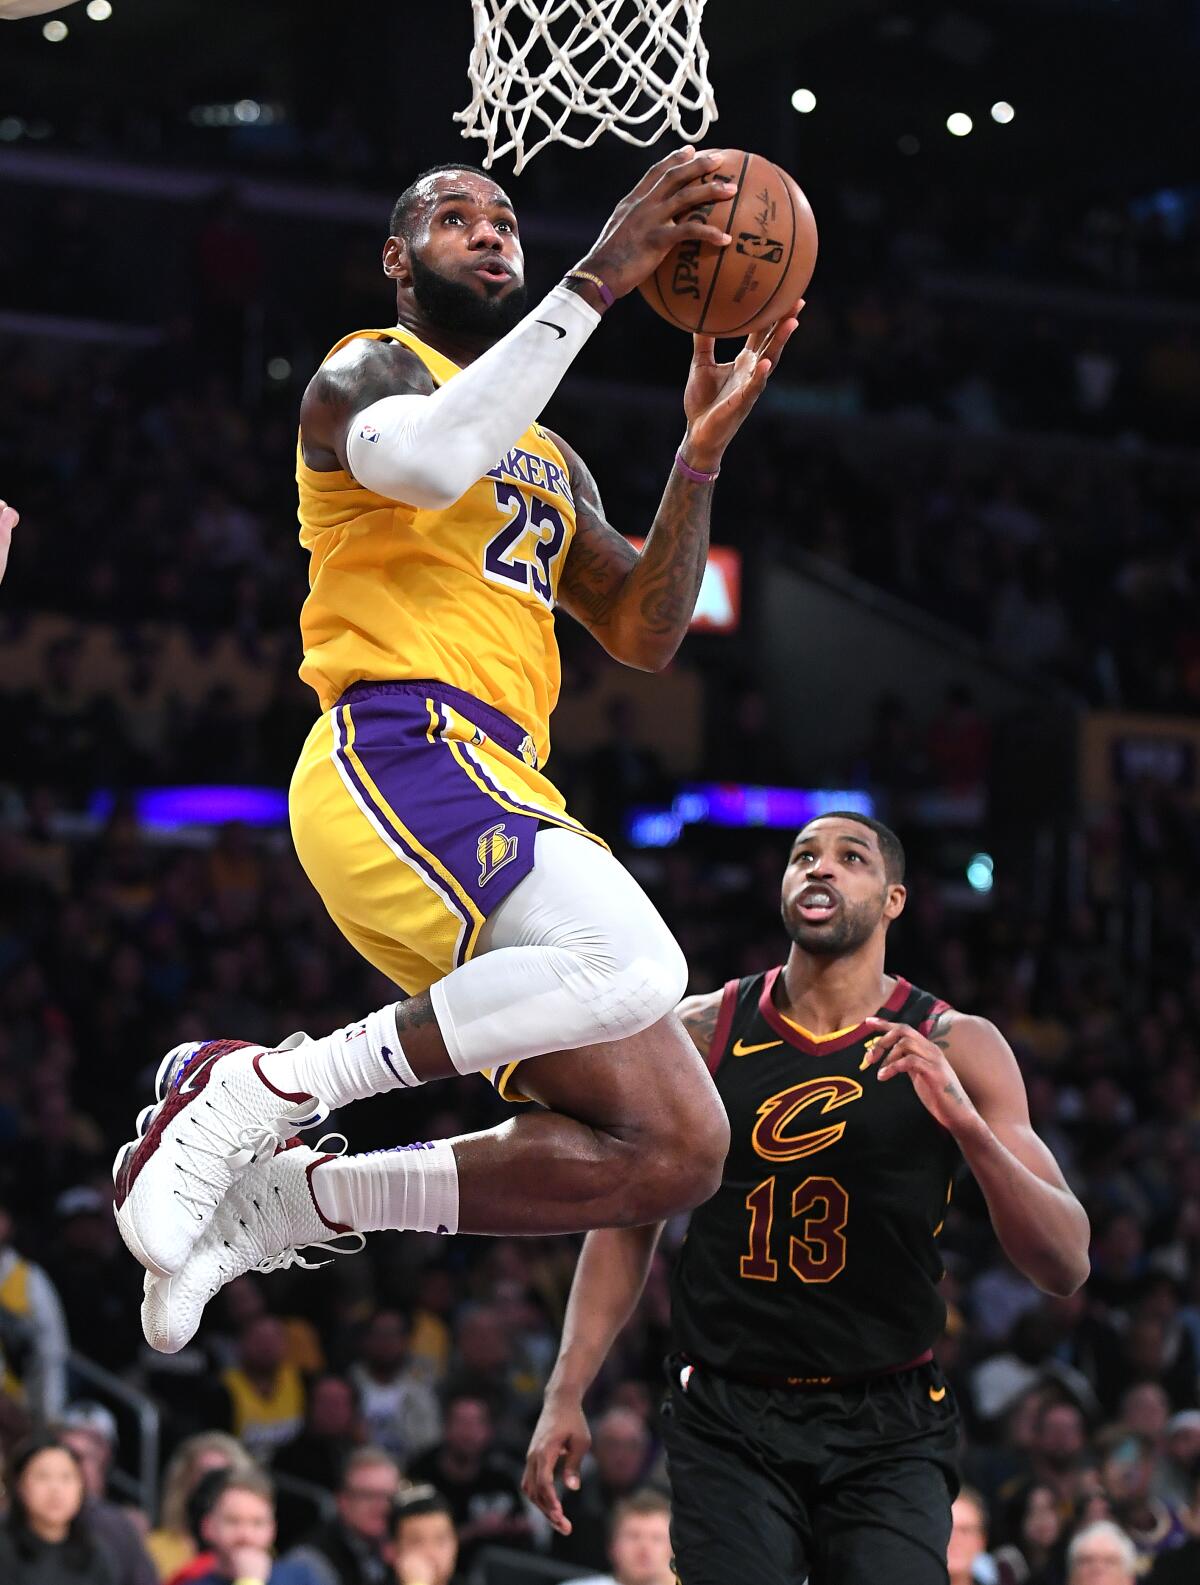 Lakers' LeBron James beats Cleveland Cavaliers' Tristan Thompson to score a basket in the fourth quarter at the Staples Center on Monday.